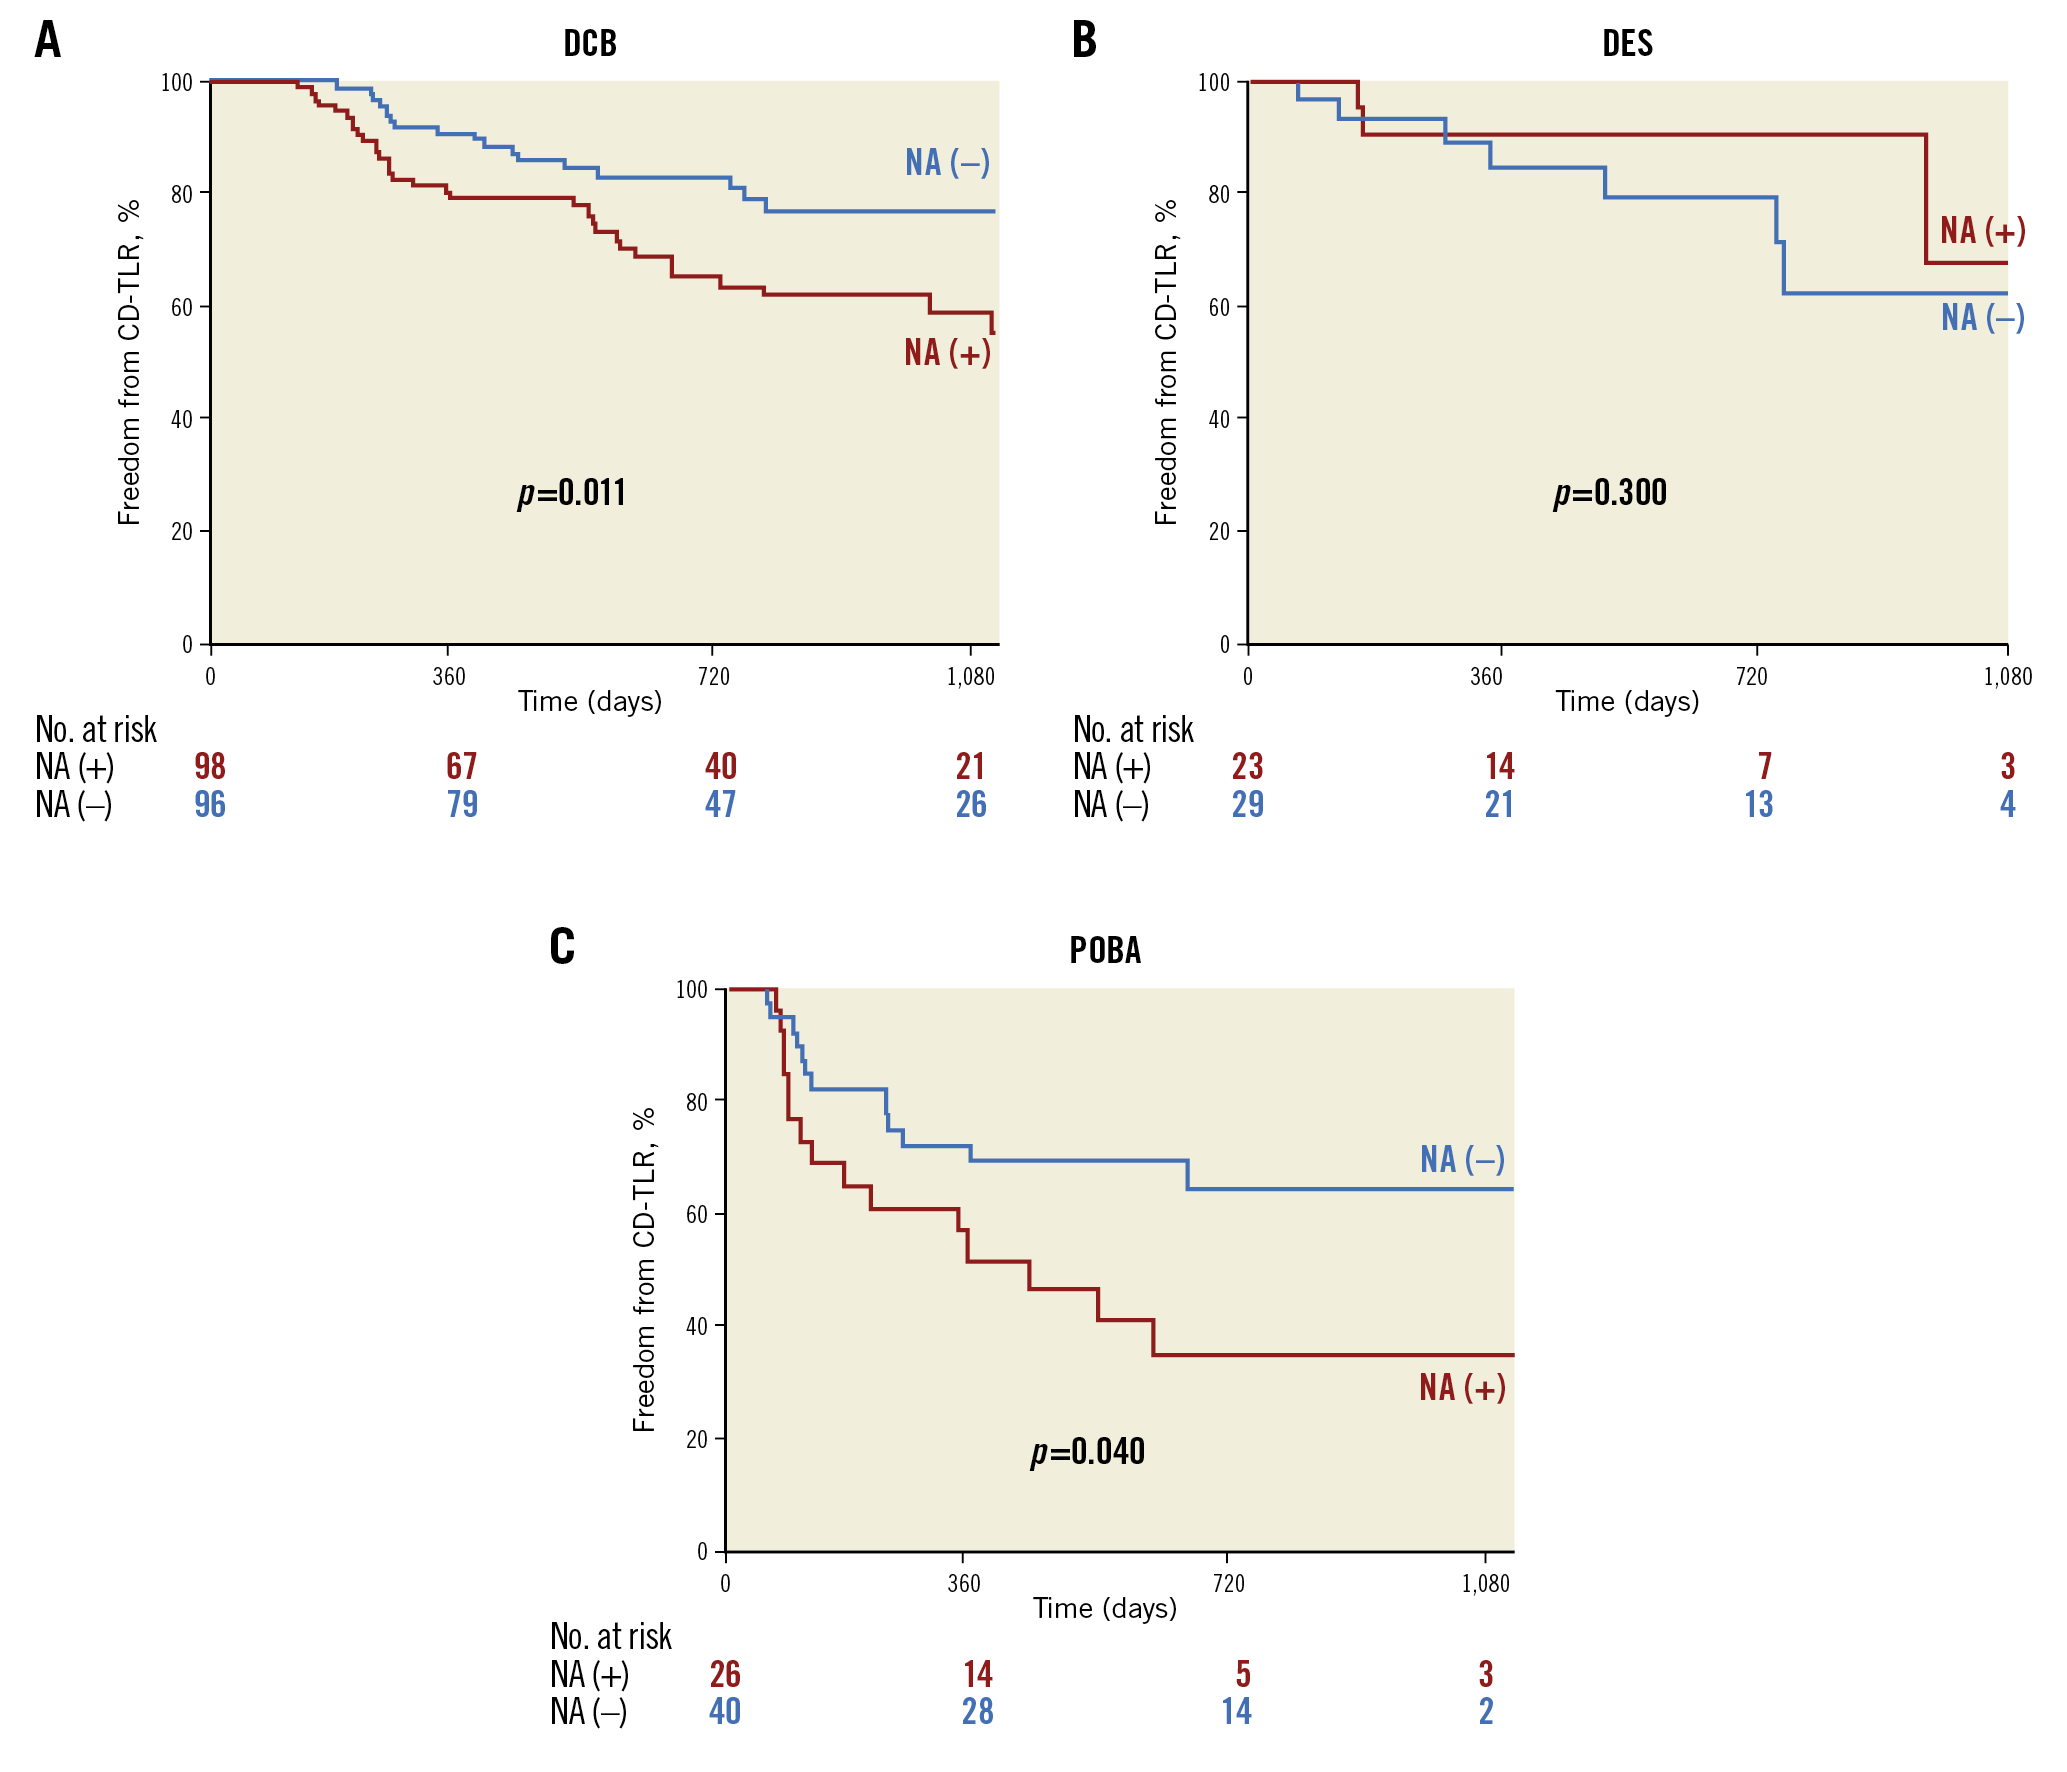 Figure 4. Kaplan-Meier curves for clinically driven target lesion revascularisation (CD-TLR) in each treatment. A) Freedom from CD-TLR at three years was significantly lower in lesions with neoatherosclerosis than in those without in the DCB treatment group. B) There was no significant difference for DES. C) The freedom from CD-TLR rate at three years was lower in cases with neoatherosclerosis for the POBA treatment group.